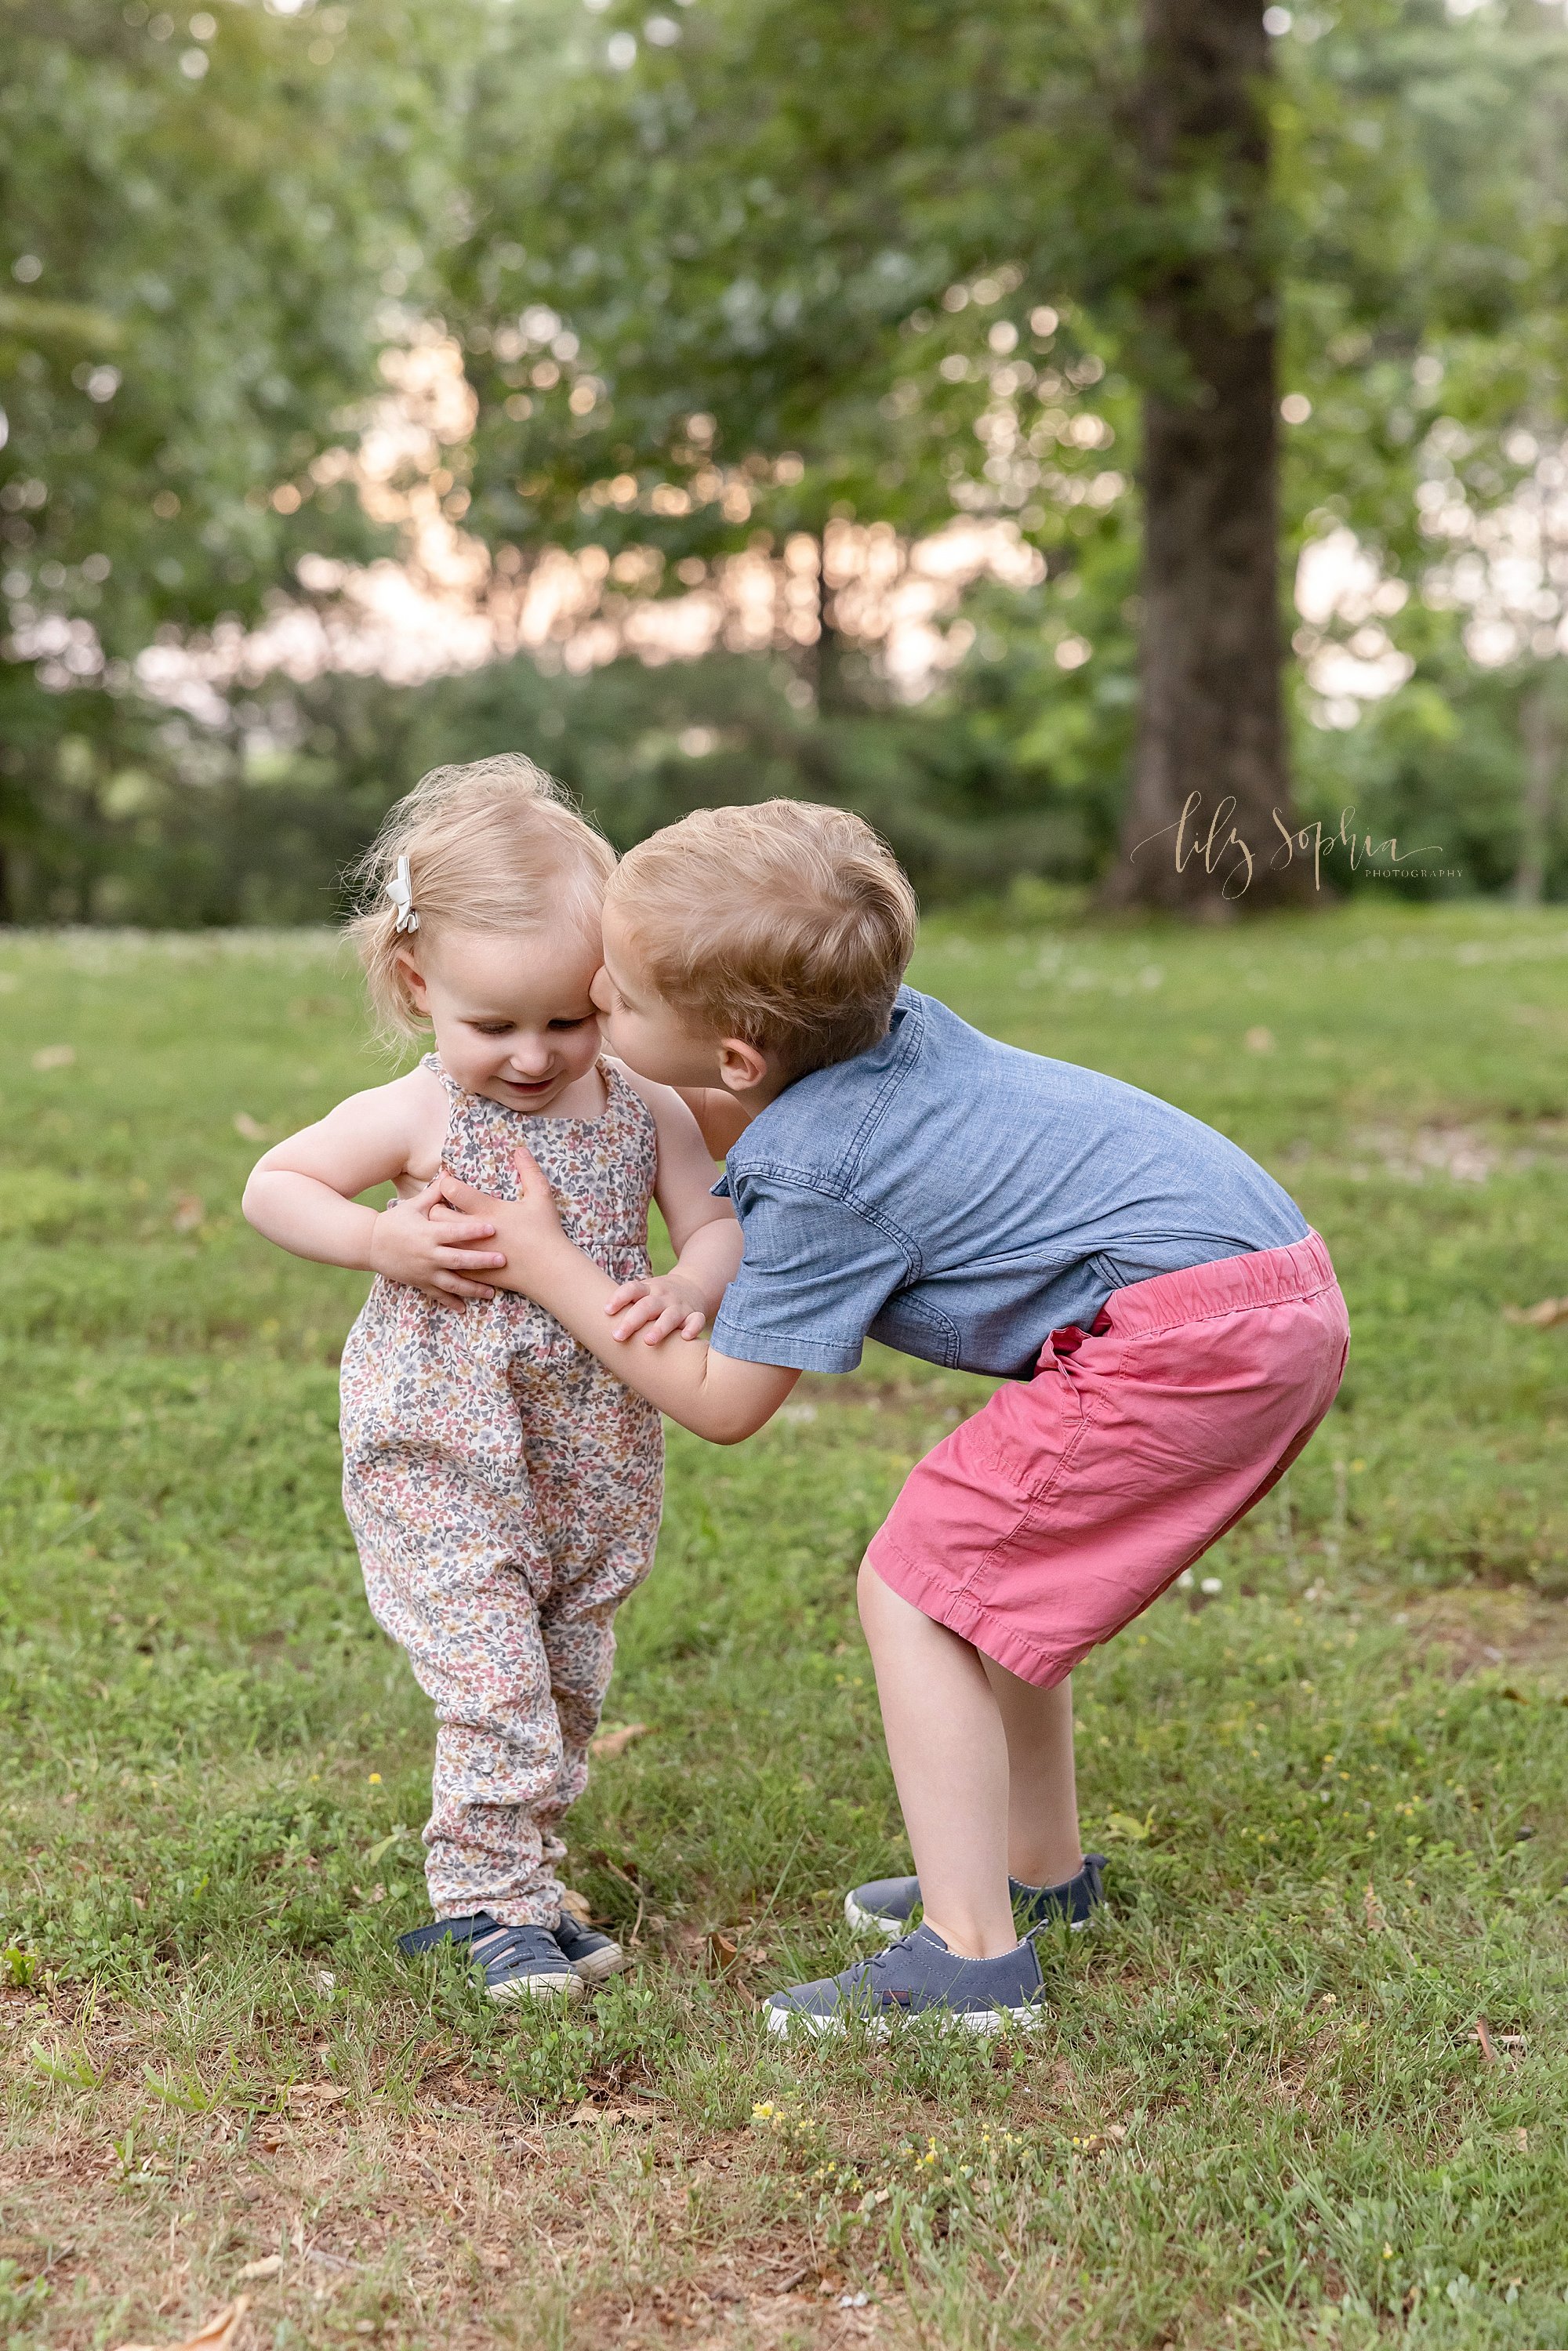  Family sibling photo of a toddler girl walking in a park as her older brother reaches down to give her a kiss taken near Atlanta at sunset. 